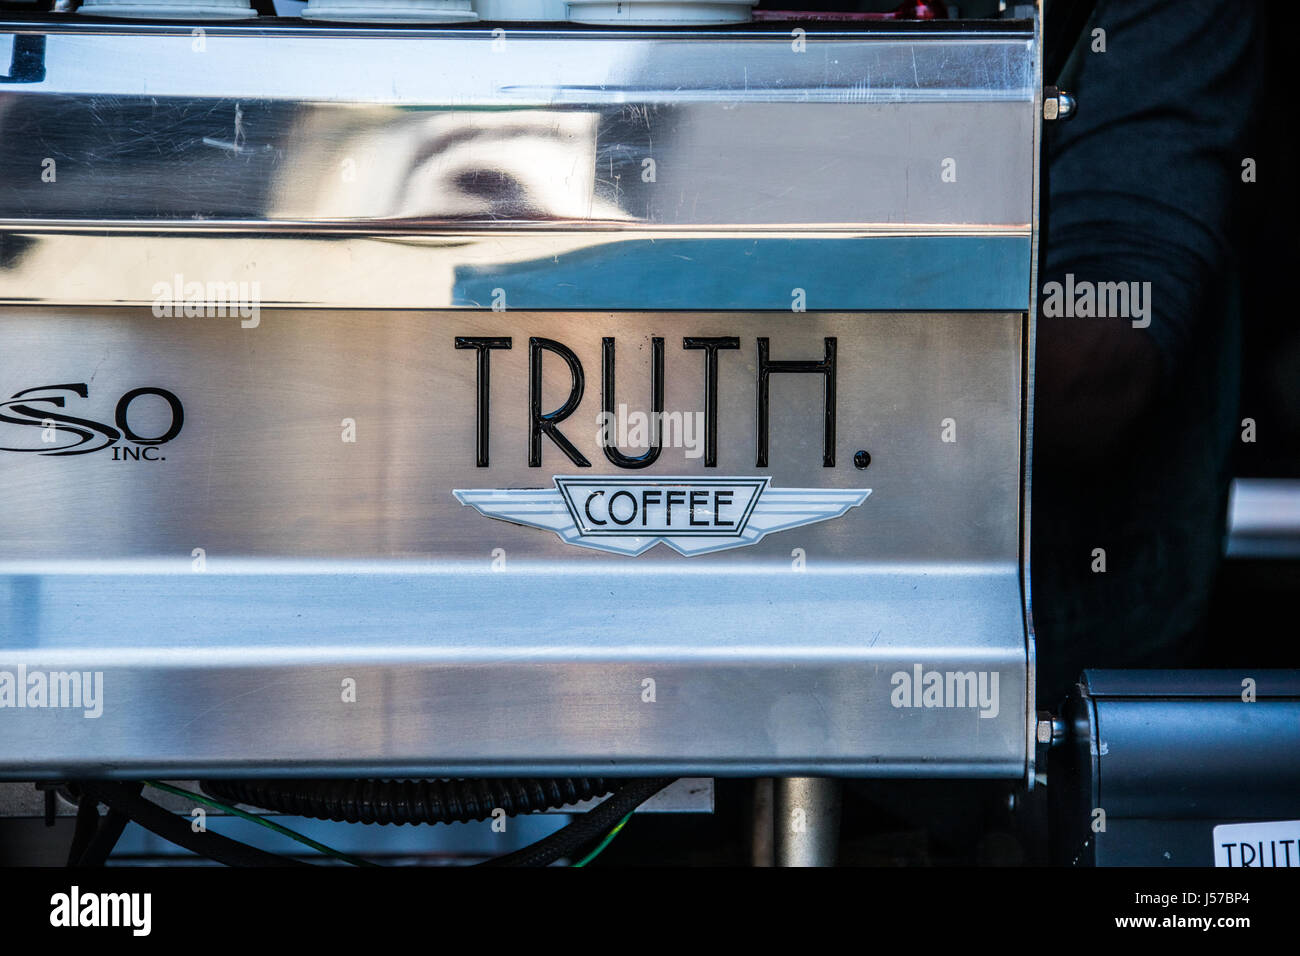 Truth Cafe, District 6, Cape Town, South Africa Stock Photo